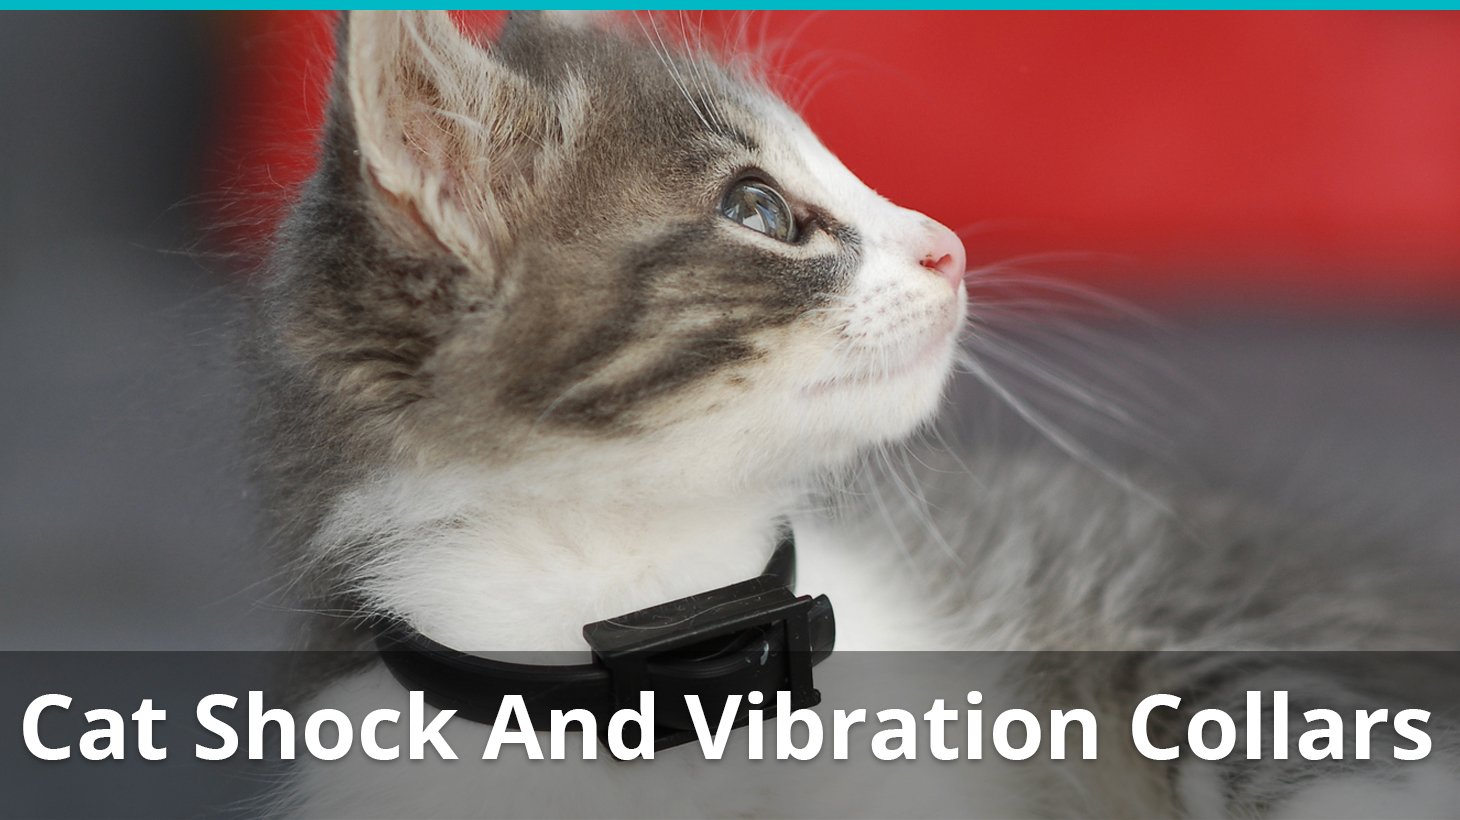 Electric Shock Collars For Cats And Kittens: Are They Safe ...